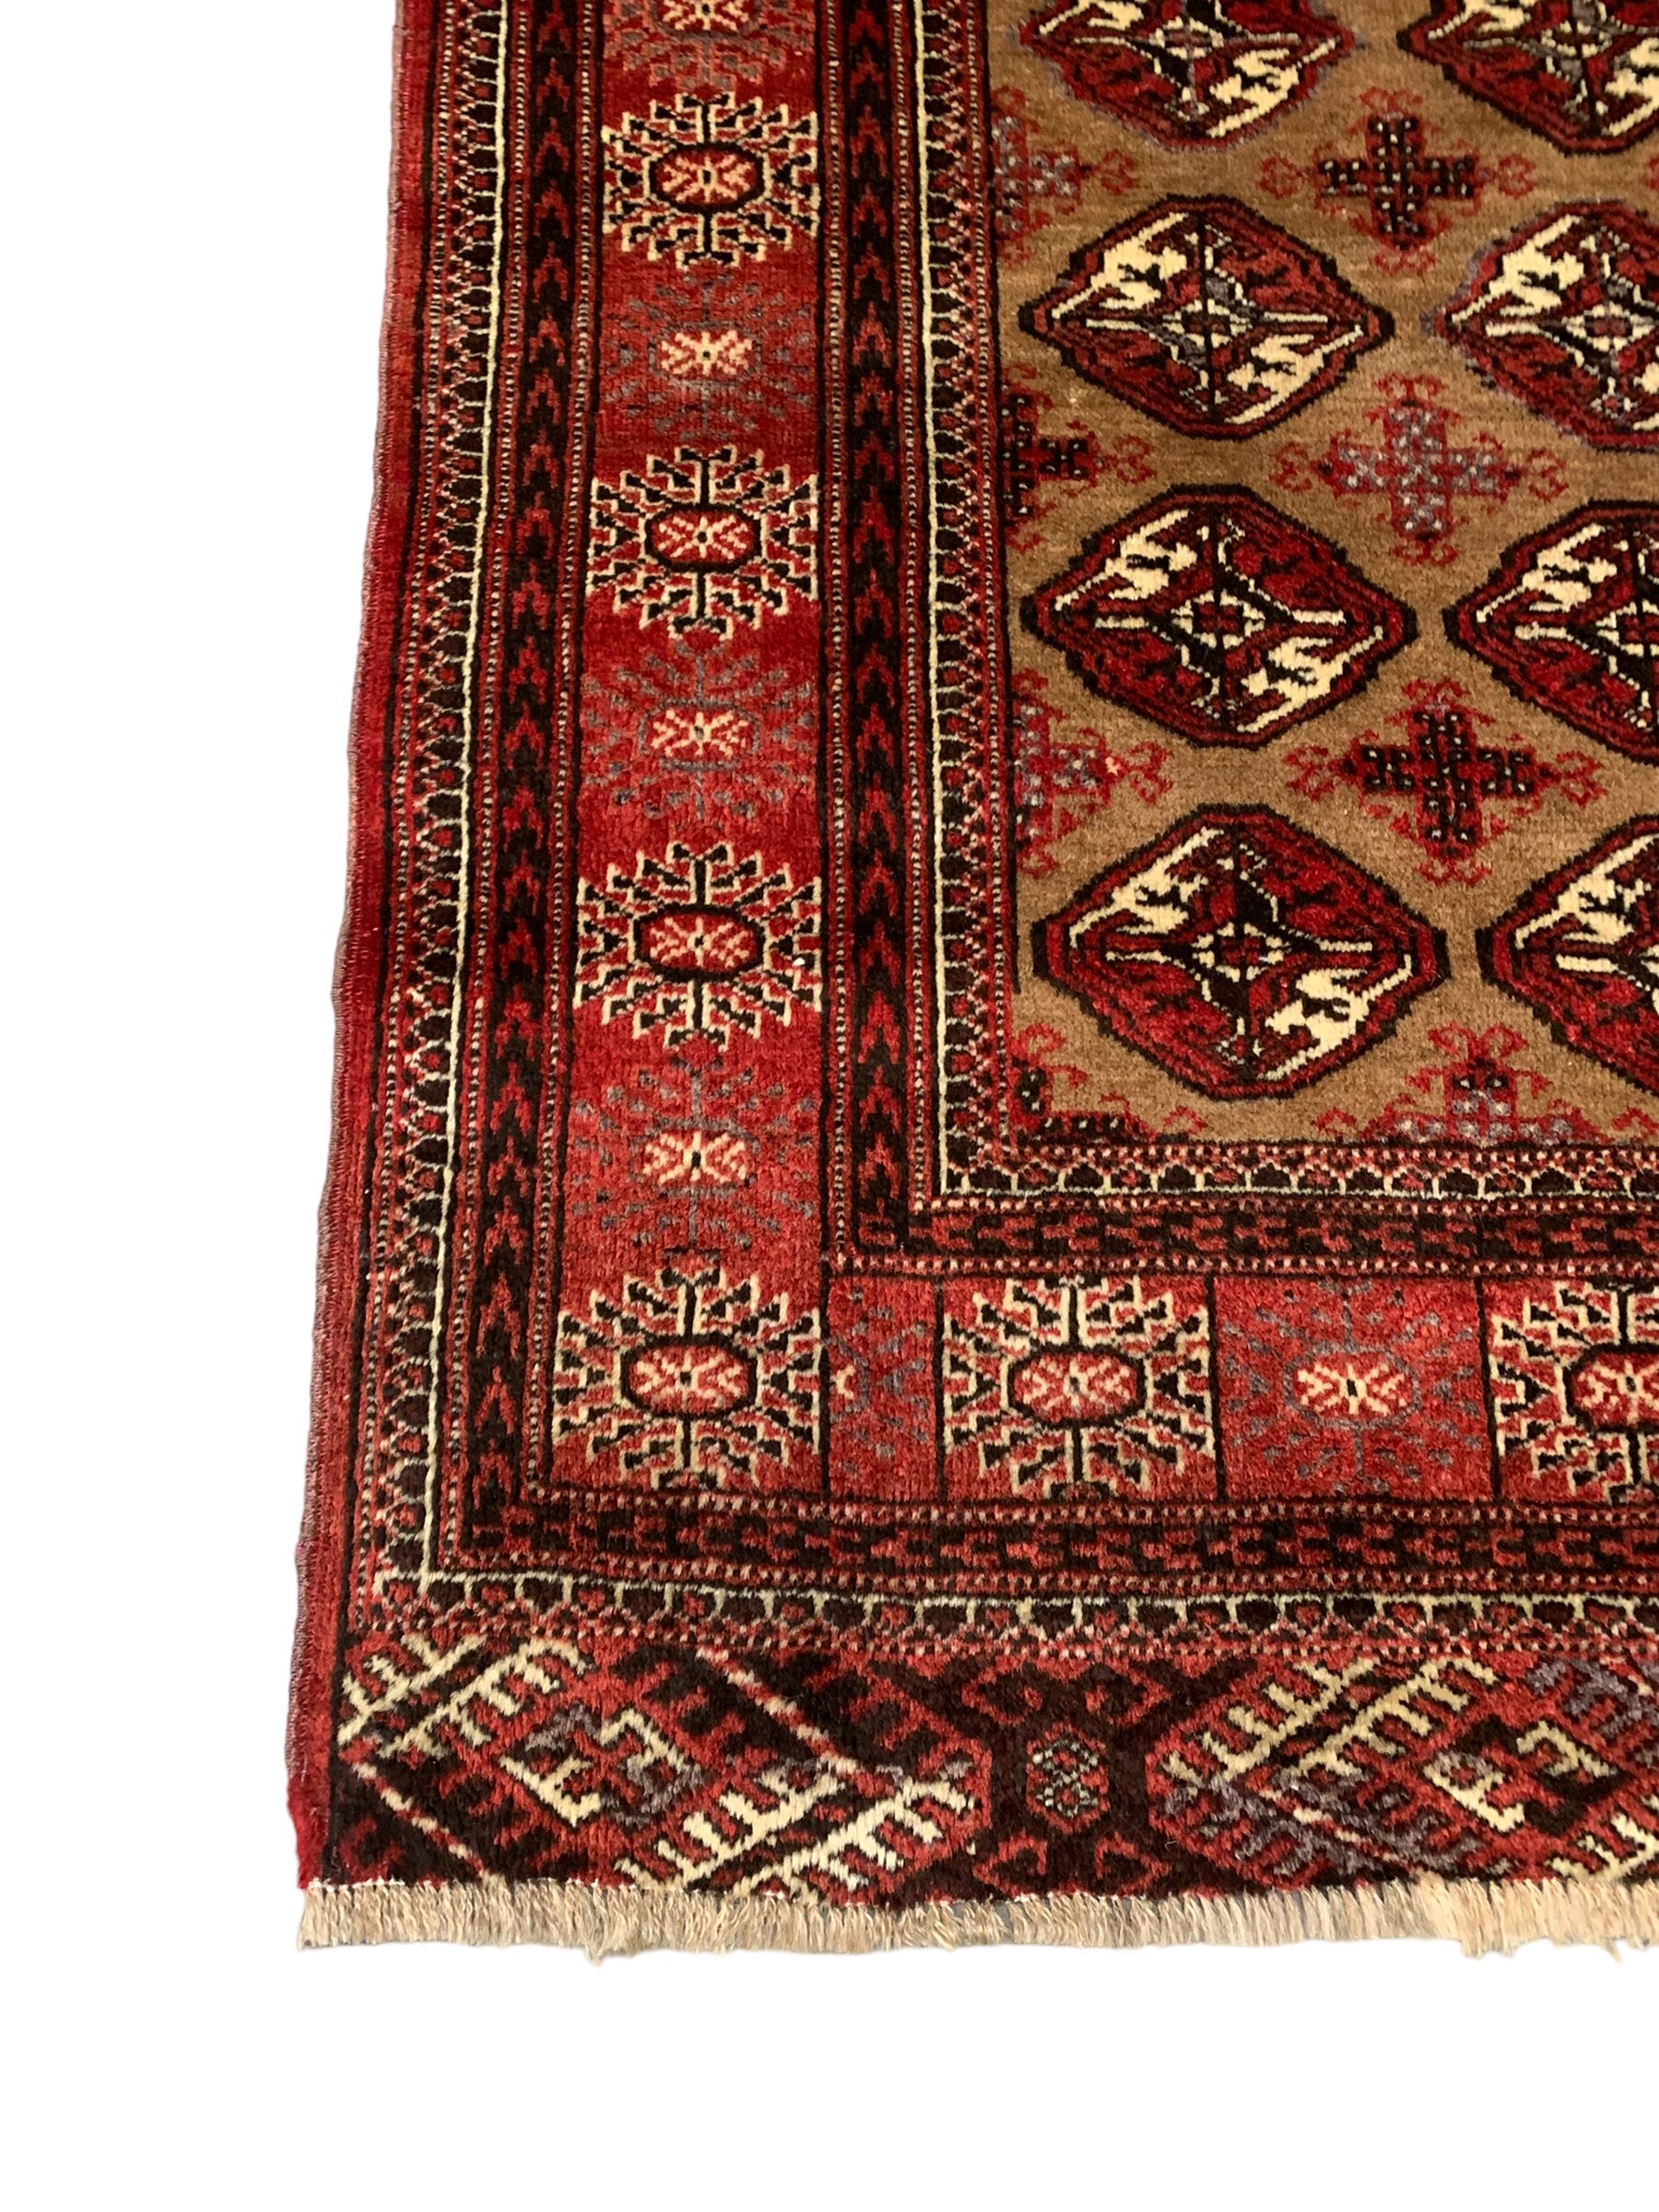 Persian Bokhara red ground rug - Image 4 of 6